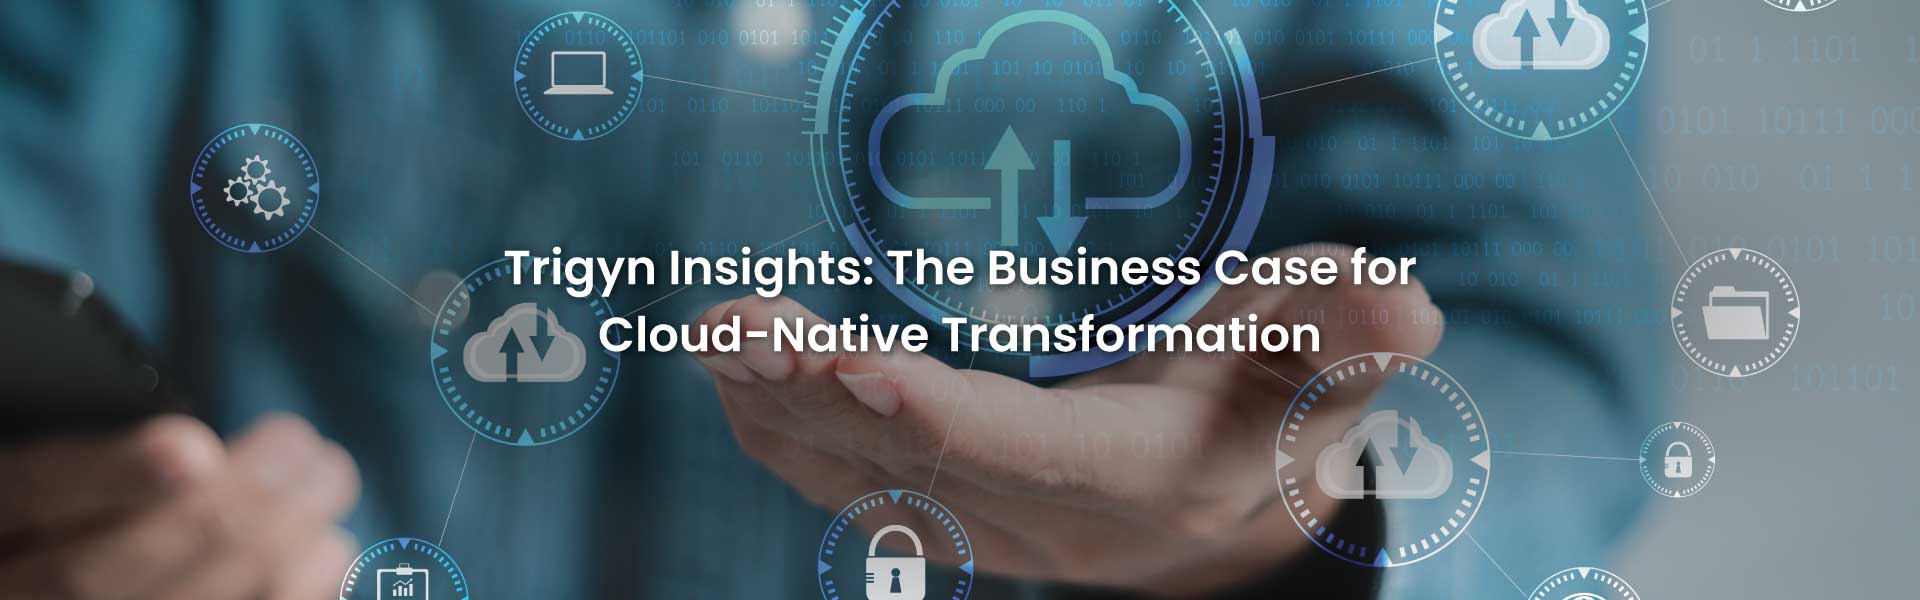 Business Case for Cloud-Native